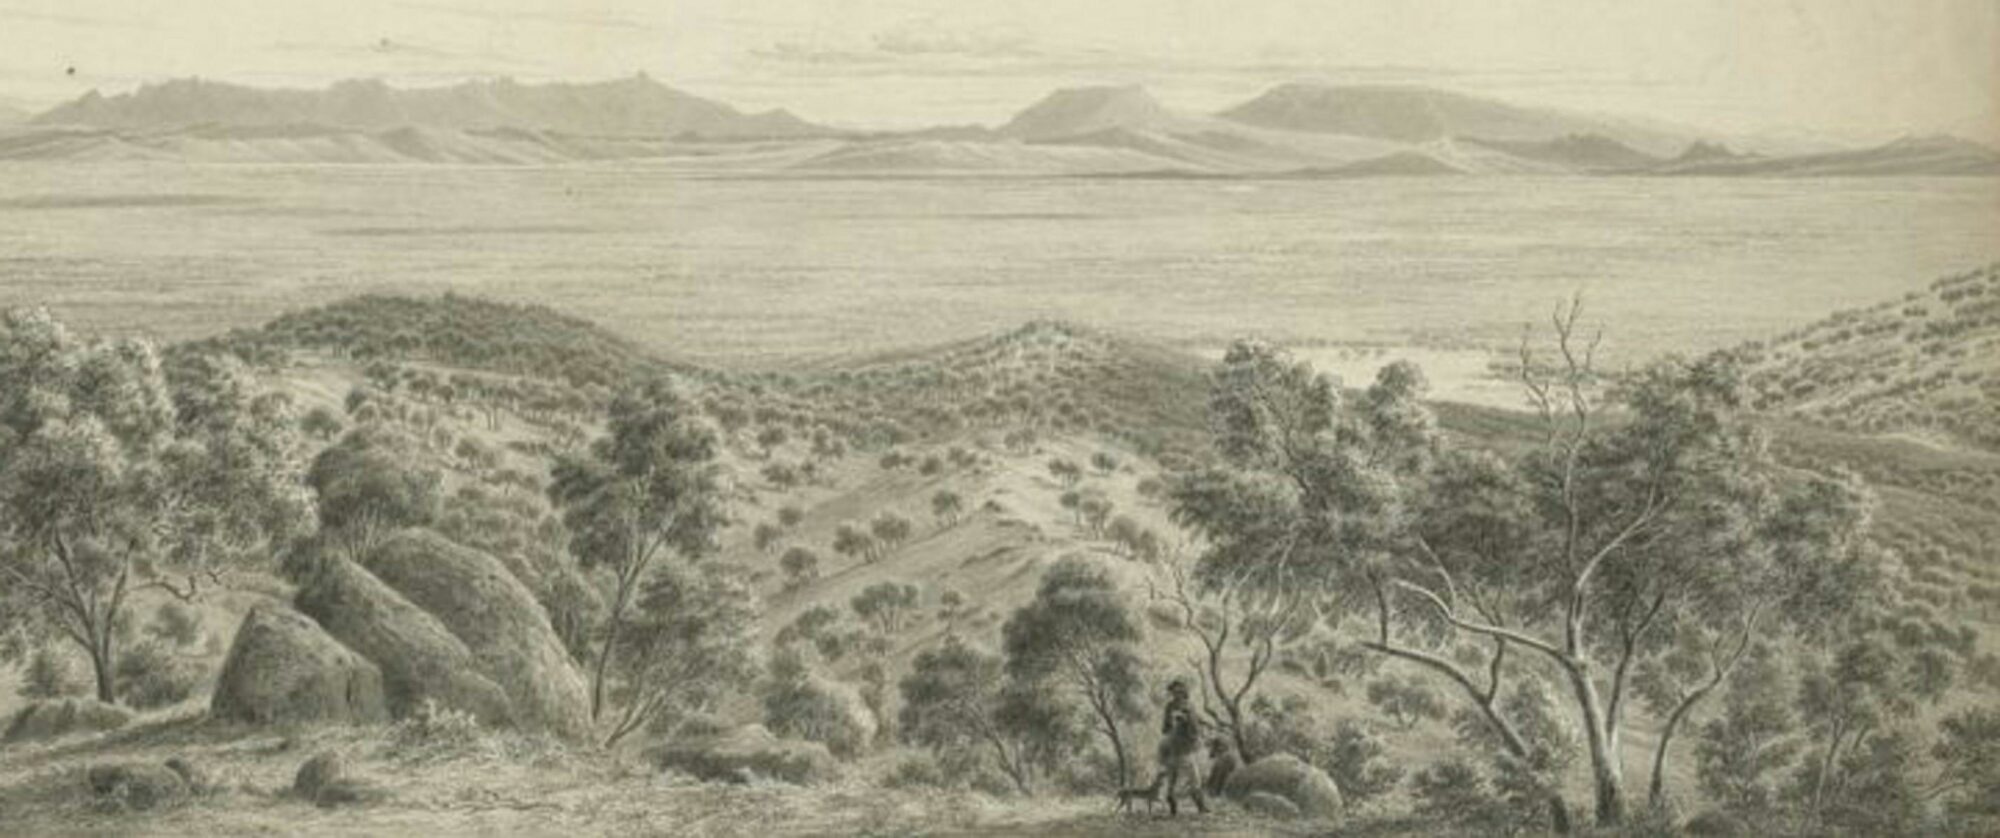 The Warby Ranges